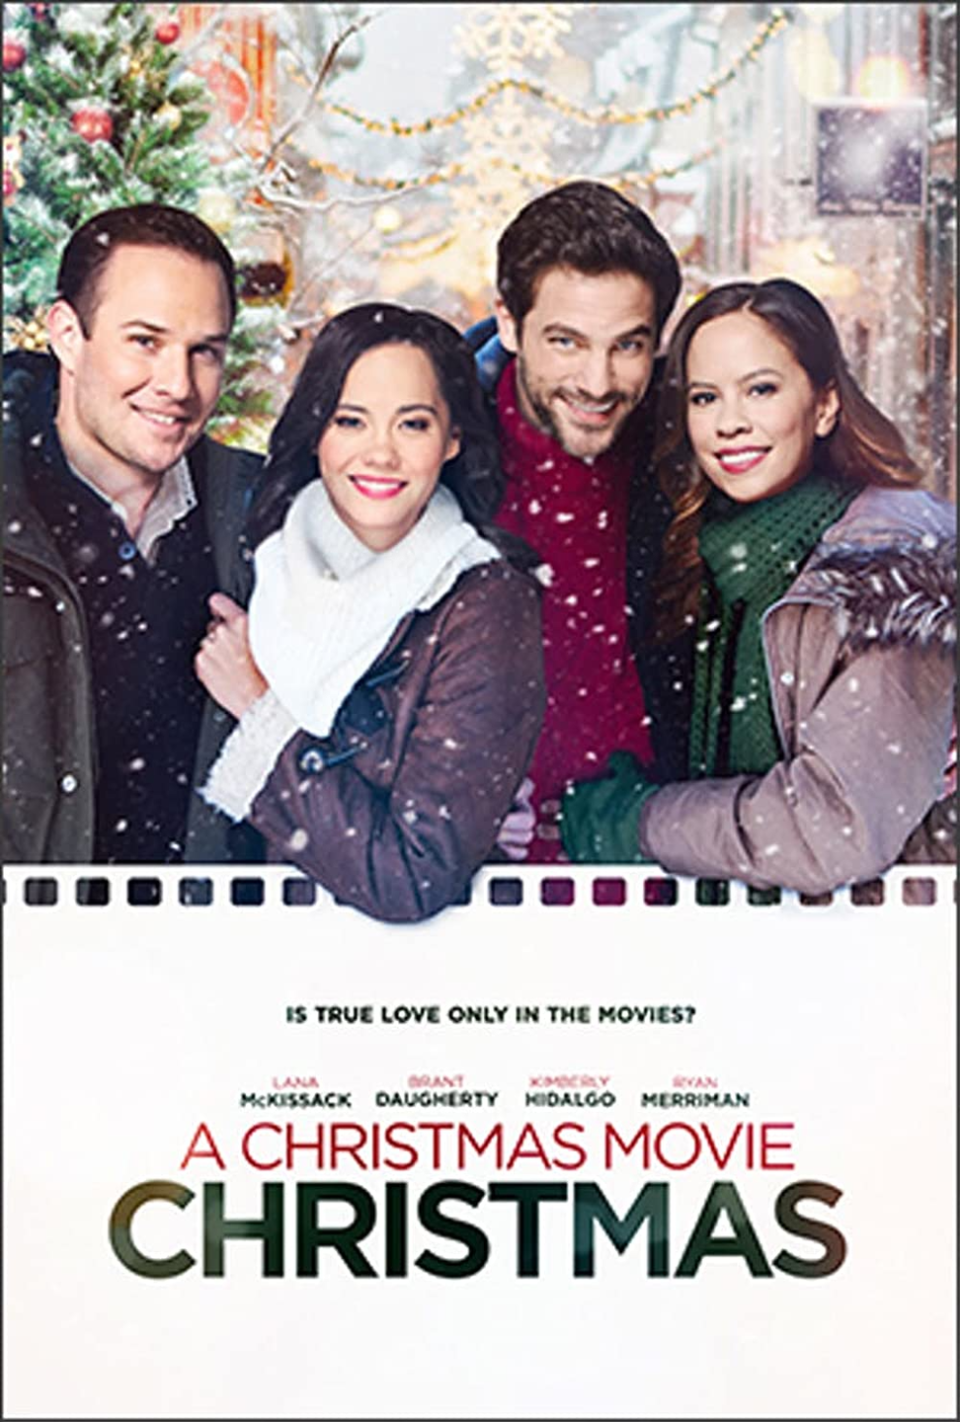 <p>If you love Christmas movies, imagine if you woke up in one. When two sisters make a wish to Santa on Christmas Eve, they find themselves thrust into the world of a holiday film. What’s the worst that could happen?</p><p><a class="link " href="https://go.redirectingat.com?id=74968X1596630&url=https%3A%2F%2Fwww.hulu.com%2Fmovie%2Fa-christmas-movie-christmas-91260c22-f865-4331-a03a-b5a5e34f2e0b&sref=https%3A%2F%2Fwww.cosmopolitan.com%2Flifestyle%2Fg42125509%2Fbest-christmas-movies-hulu%2F" rel="nofollow noopener" target="_blank" data-ylk="slk:Shop Now">Shop Now</a></p>